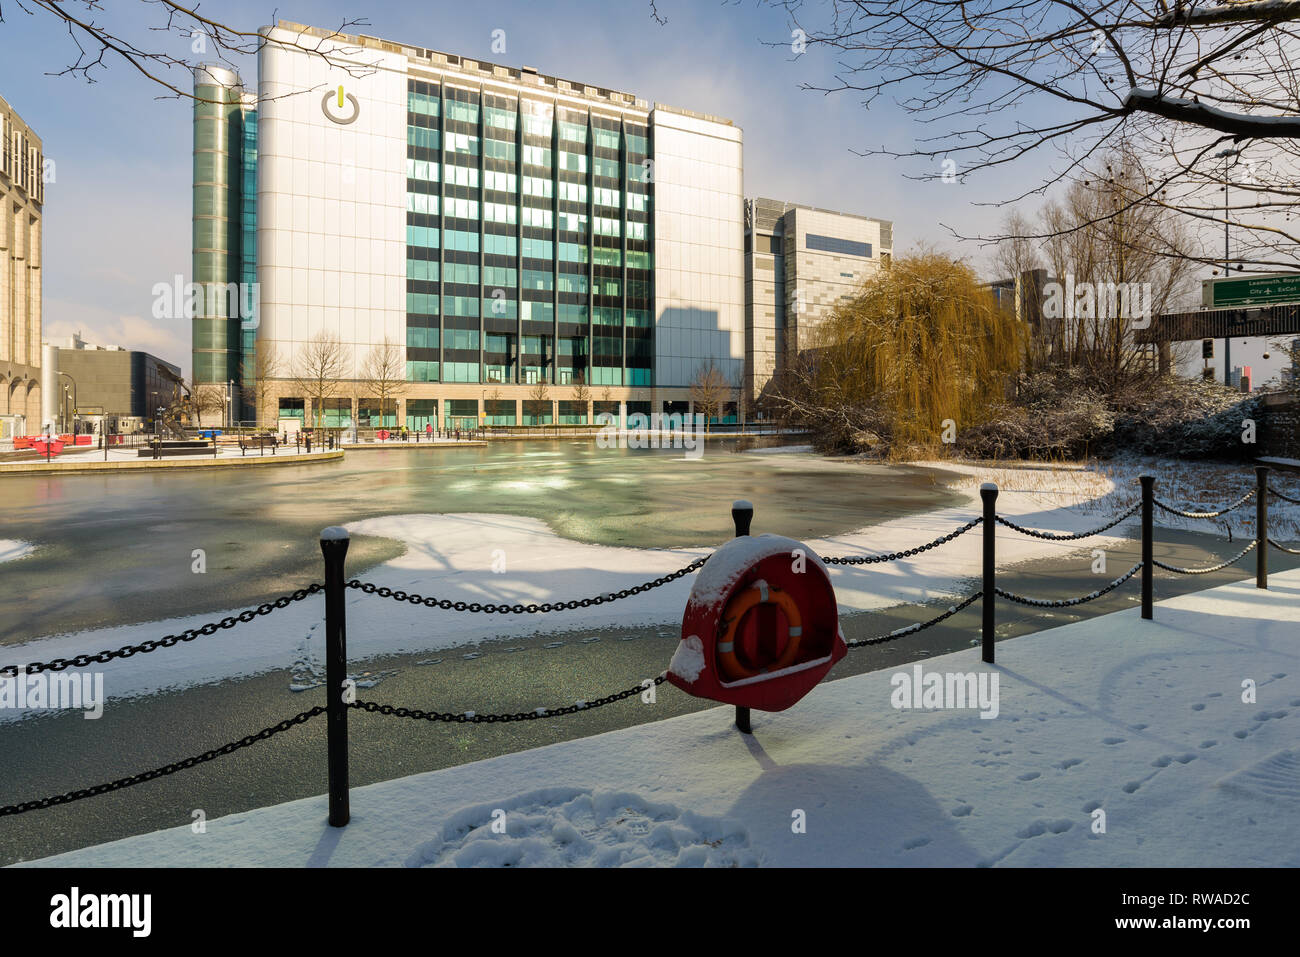 London, England - Feb 2018. Fresh snow covers the frozen pond next to East India DLR station in Poplar. In the background the Global Switch building. Stock Photo